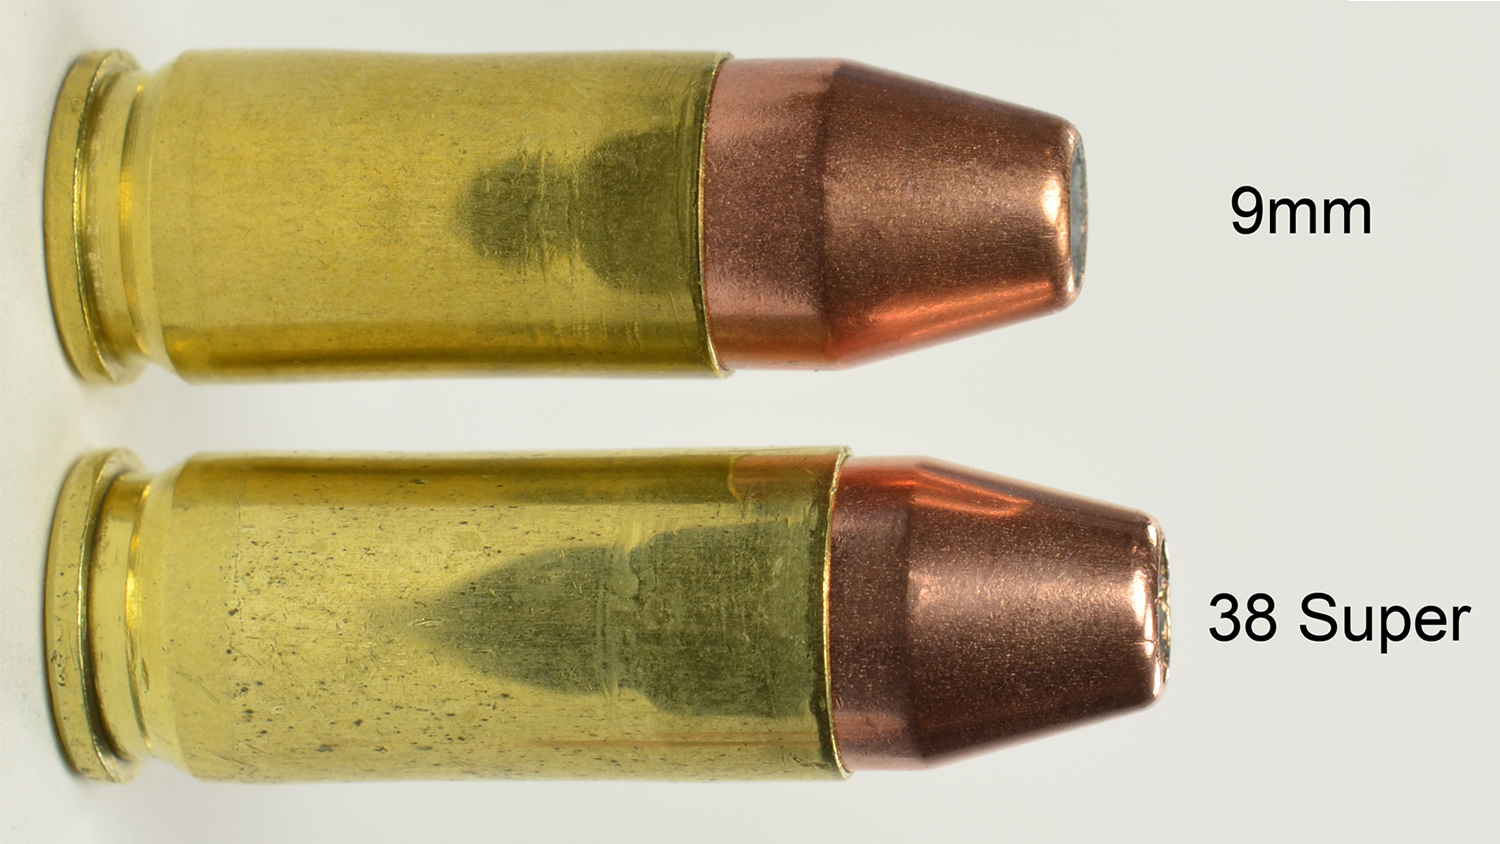 Figure 1. 9mm and .38 Super